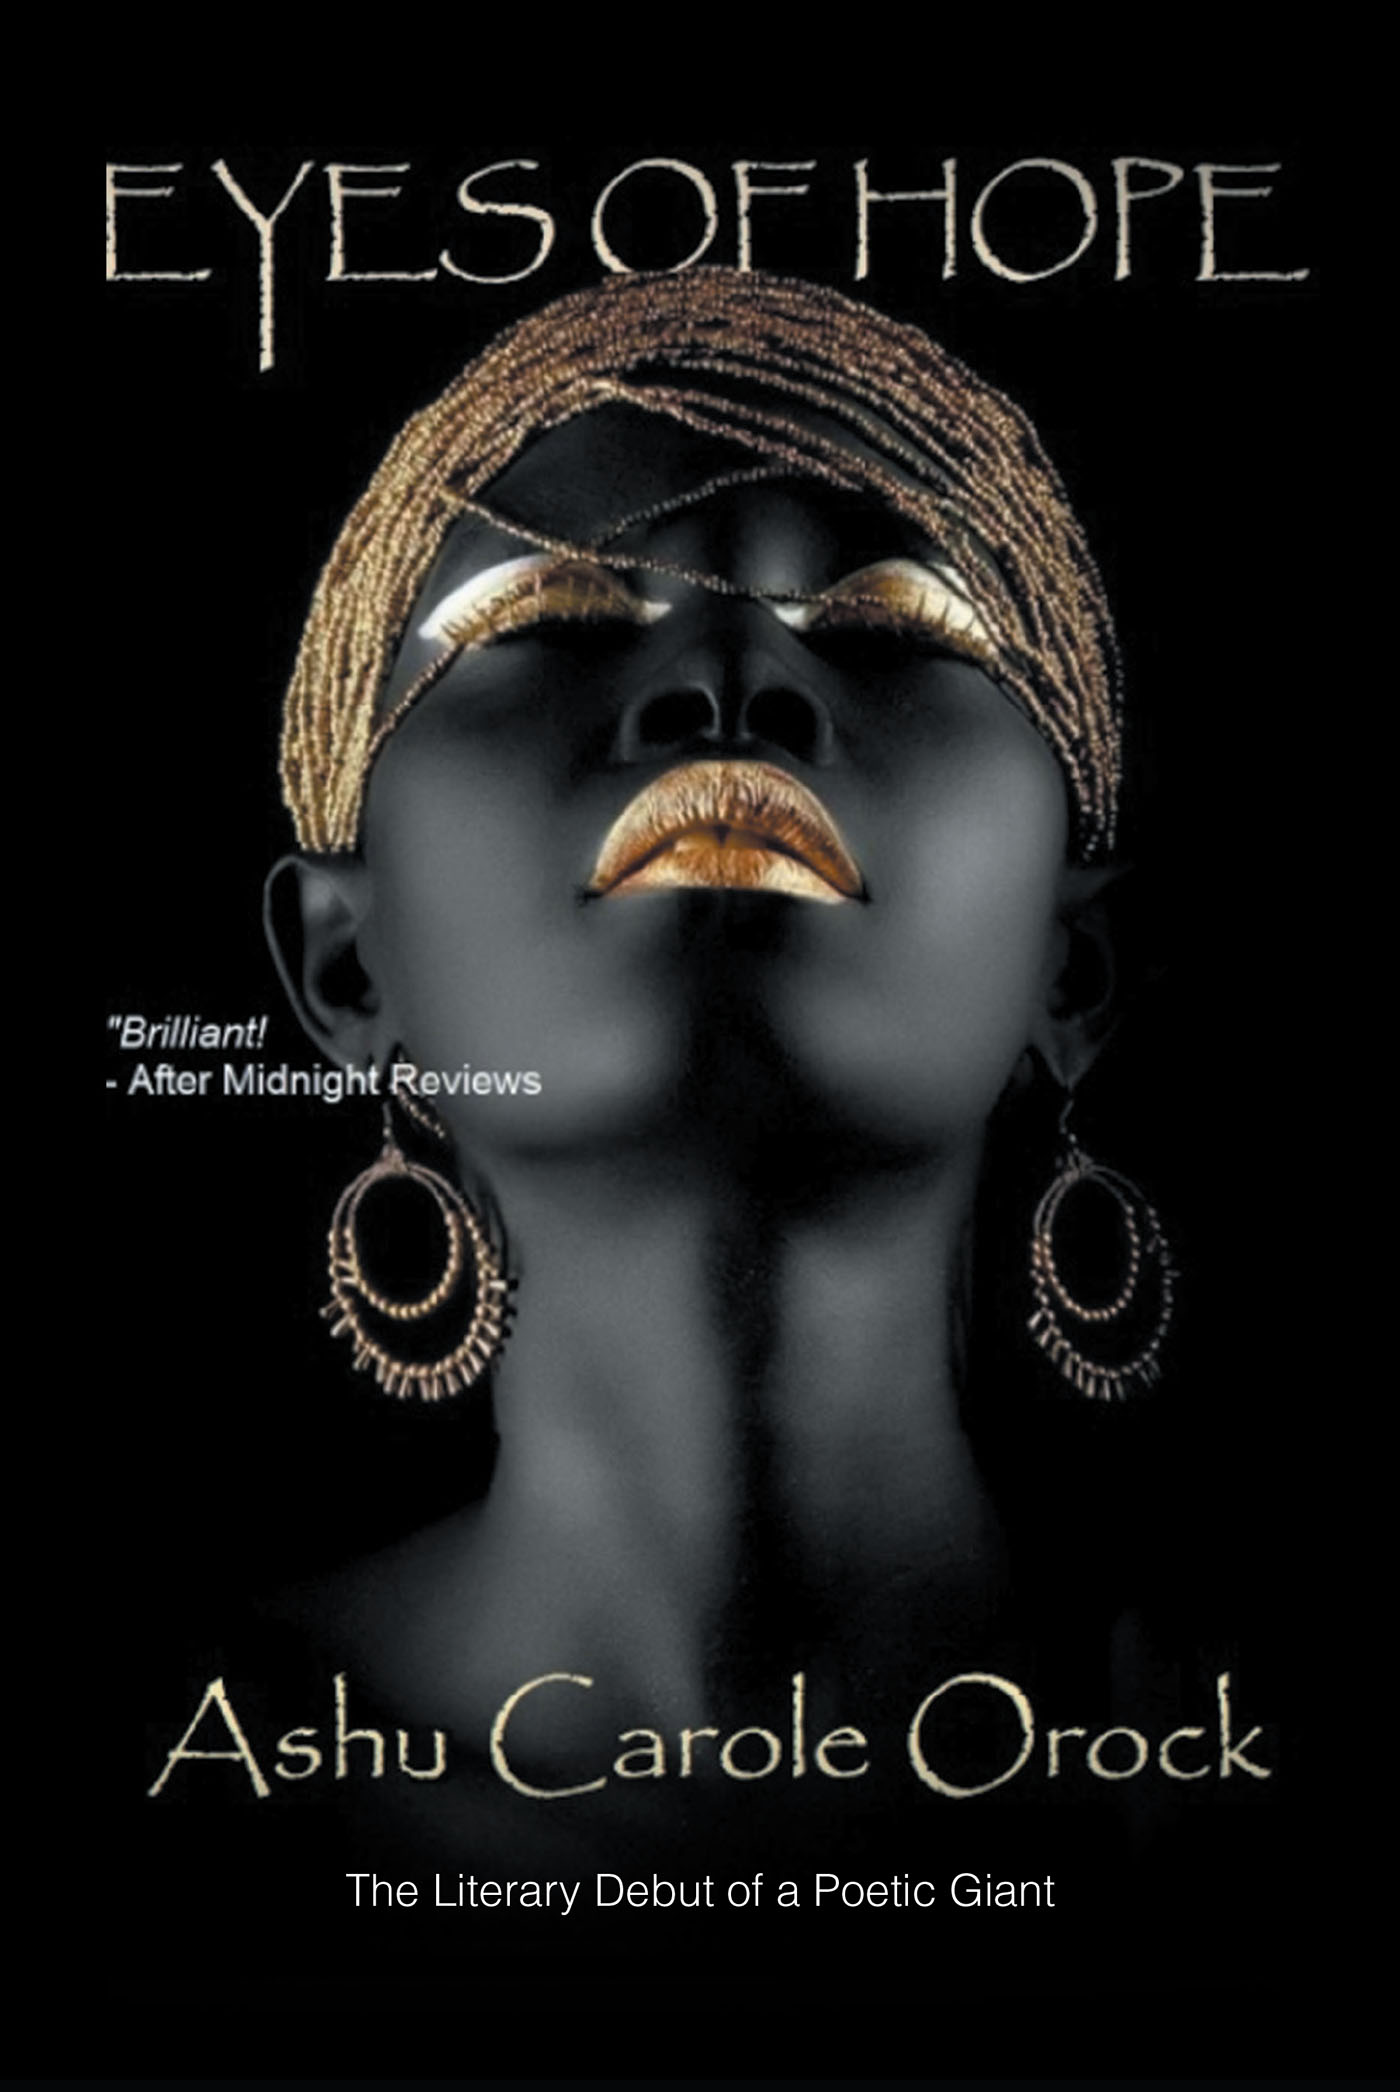 Ashu Carole Orock’s Newly Released “EYES OF HOPE: The Literary Debut of a Poetic Giant” is a Vibrant and Thoughtful Anthology